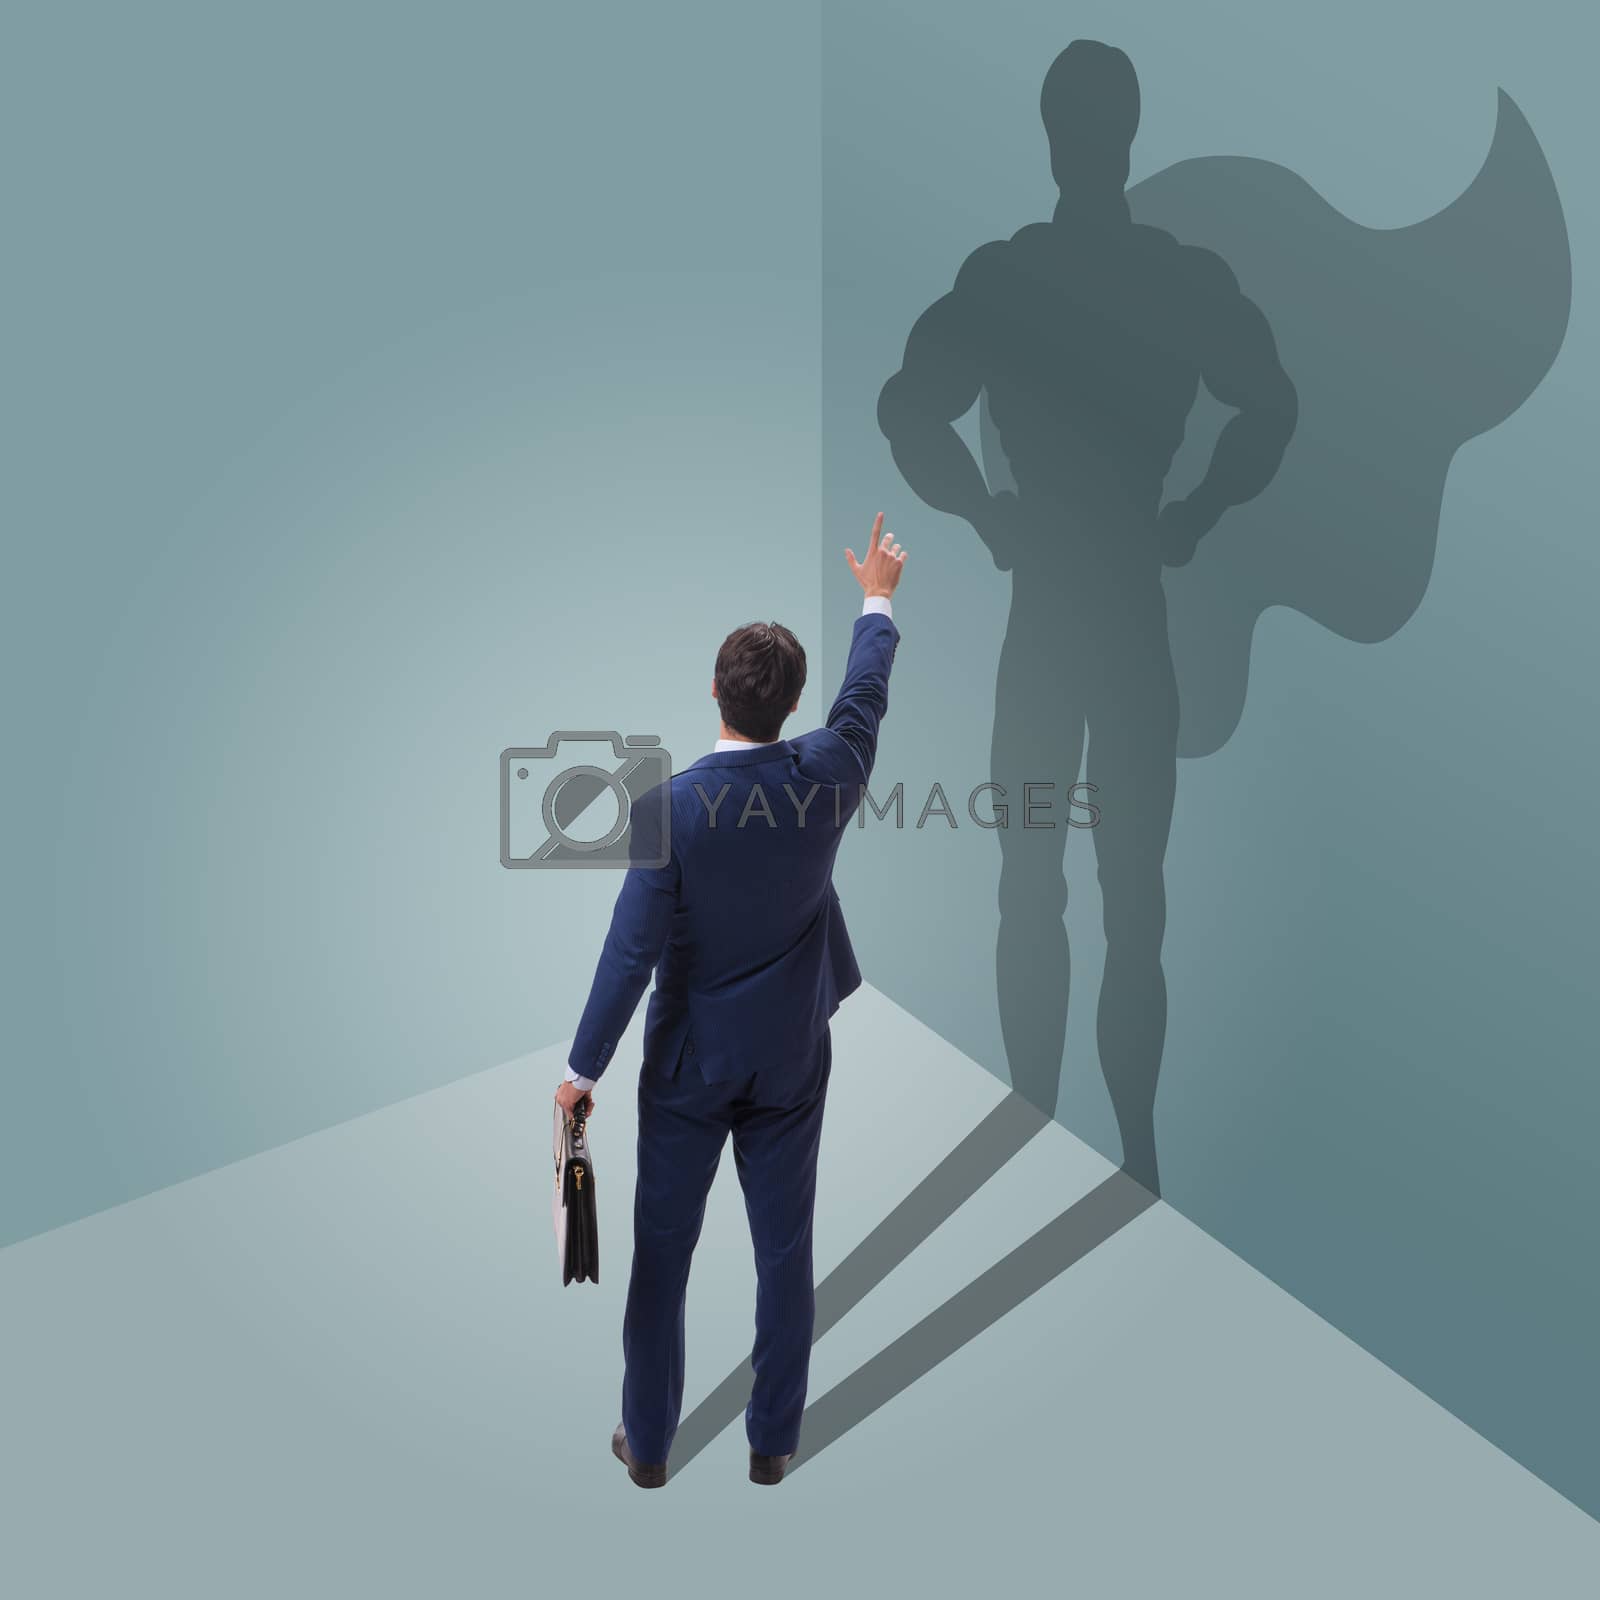 Royalty free image of Businessman with aspiration of becoming superhero by Elnur